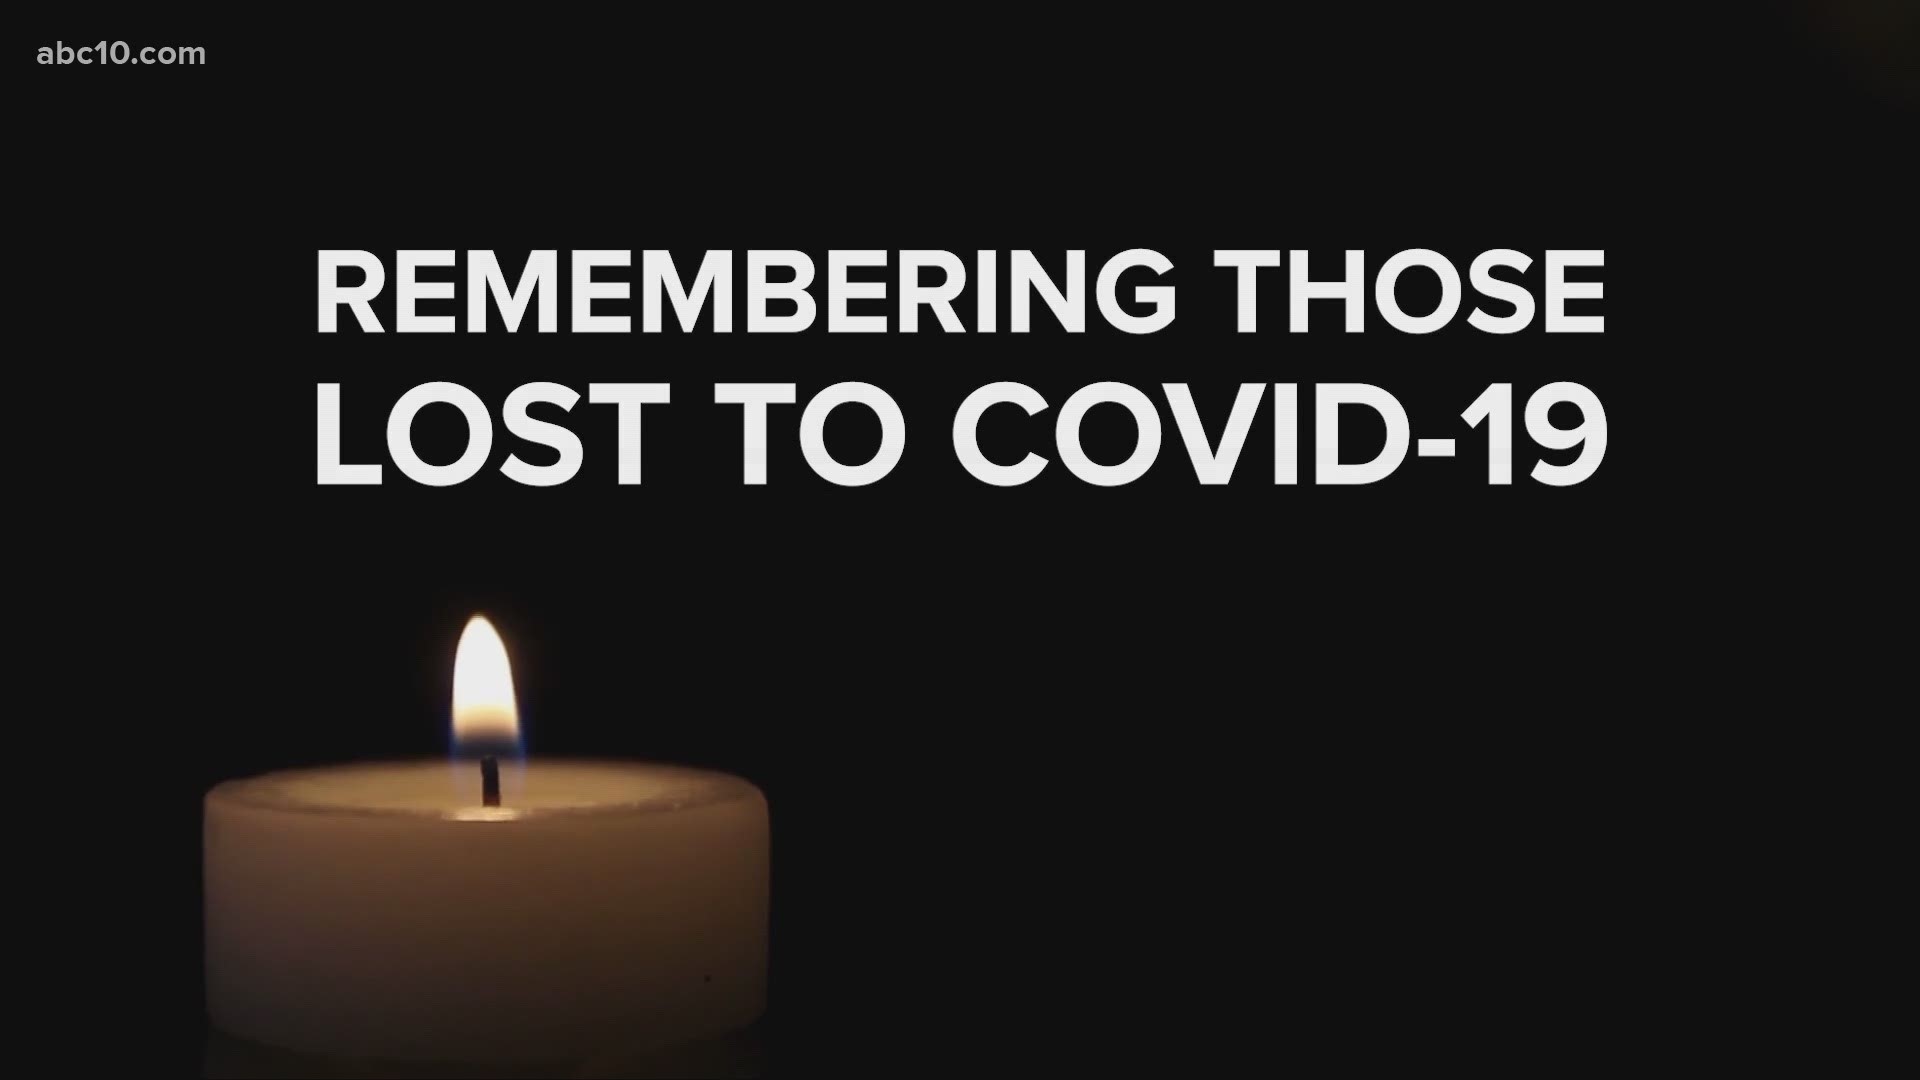 California has hit the grim milestone of 50,000 COVID-19 deaths. Family and friends shared their memories of the loved ones behind those numbers.